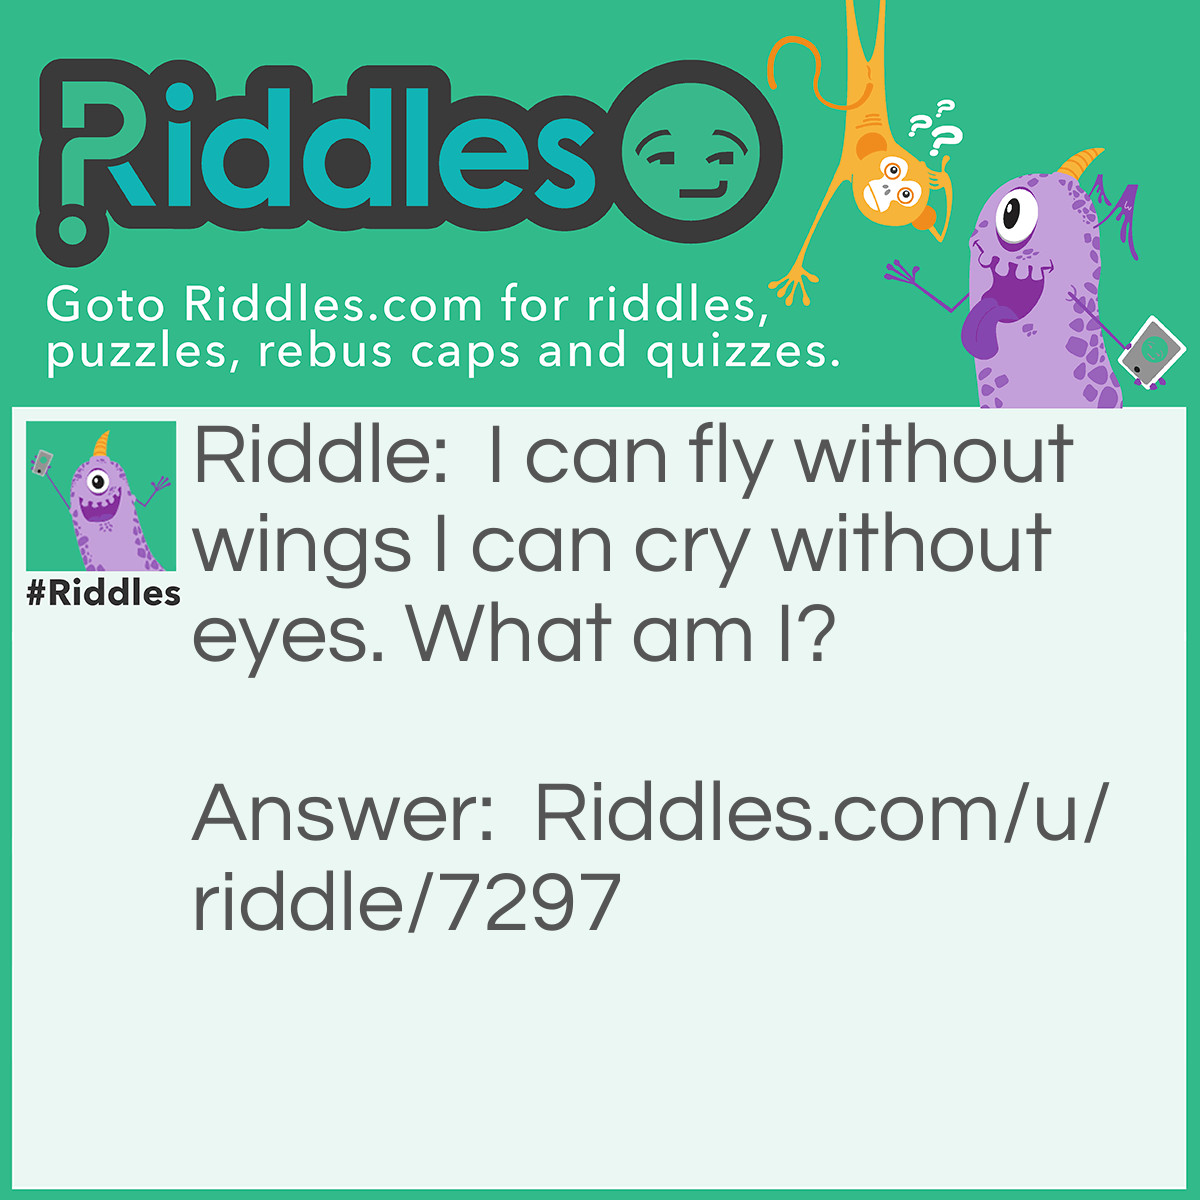 Riddle: I can fly without wings I can cry without eyes. What am I? Answer: A cloud.